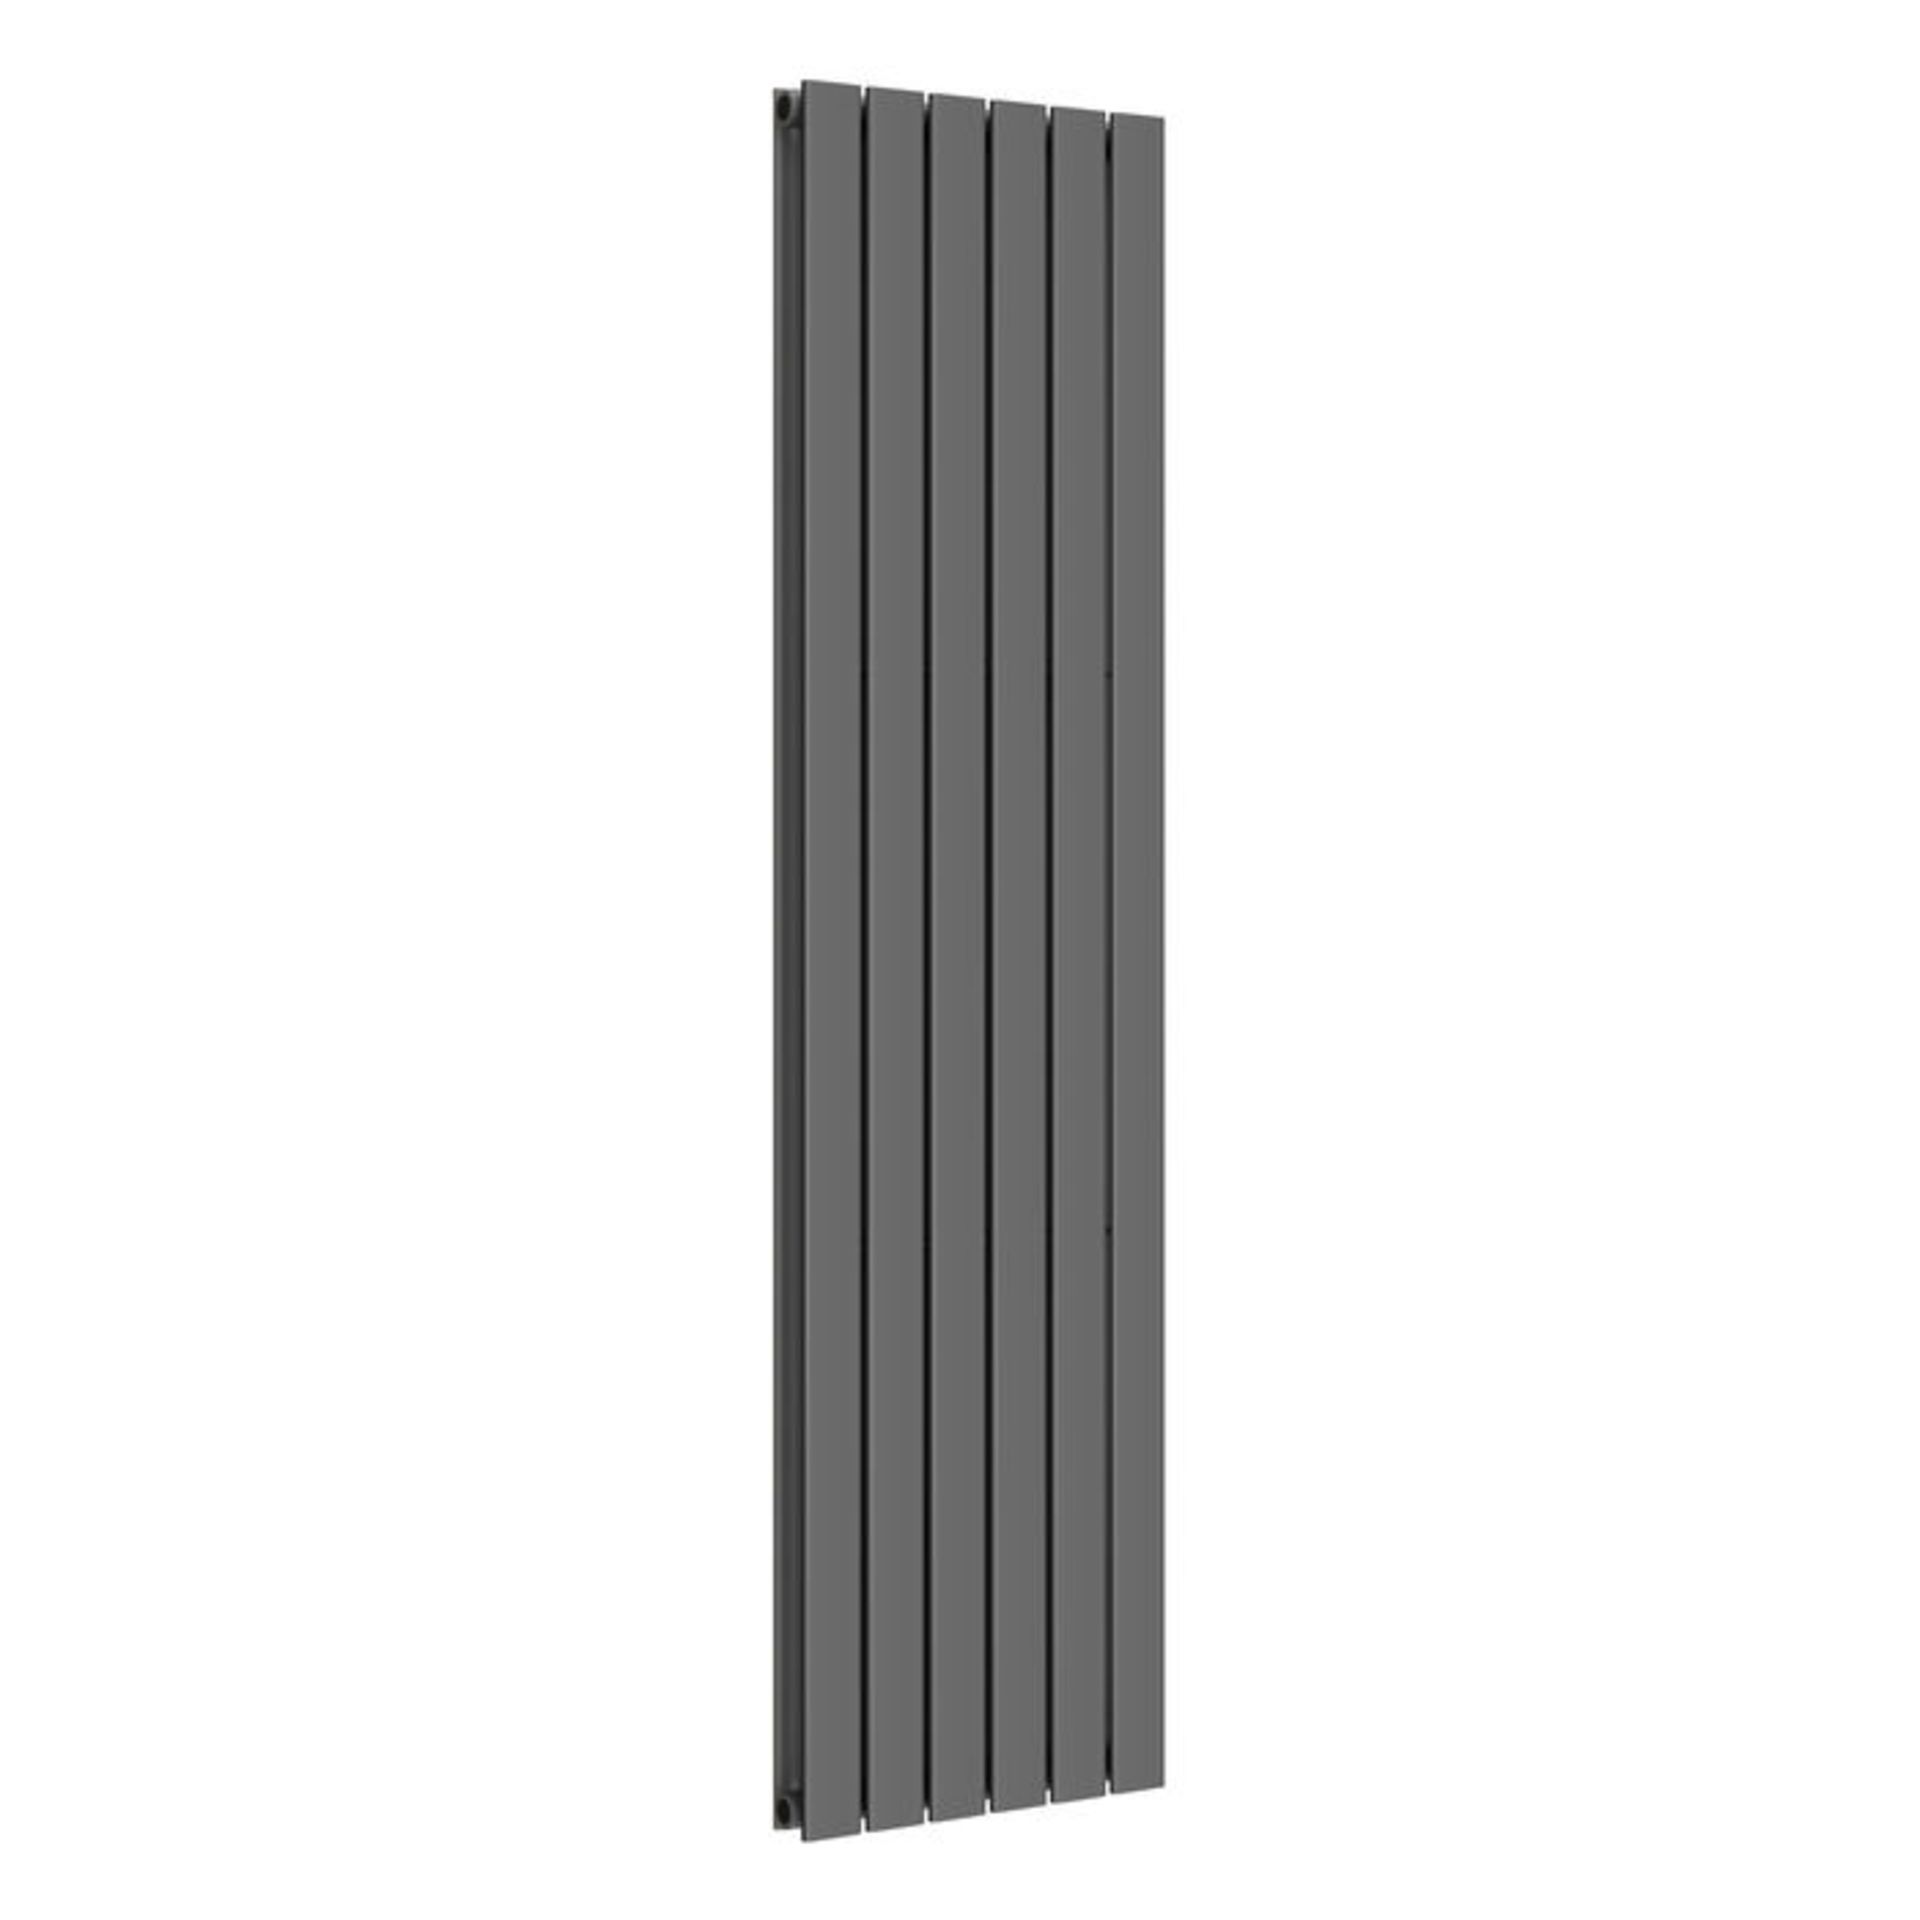 1800x480mm Anthracite Double Flat Panel Vertical Radiator. RRP £499.99. Made with low carbon ... - Image 3 of 3